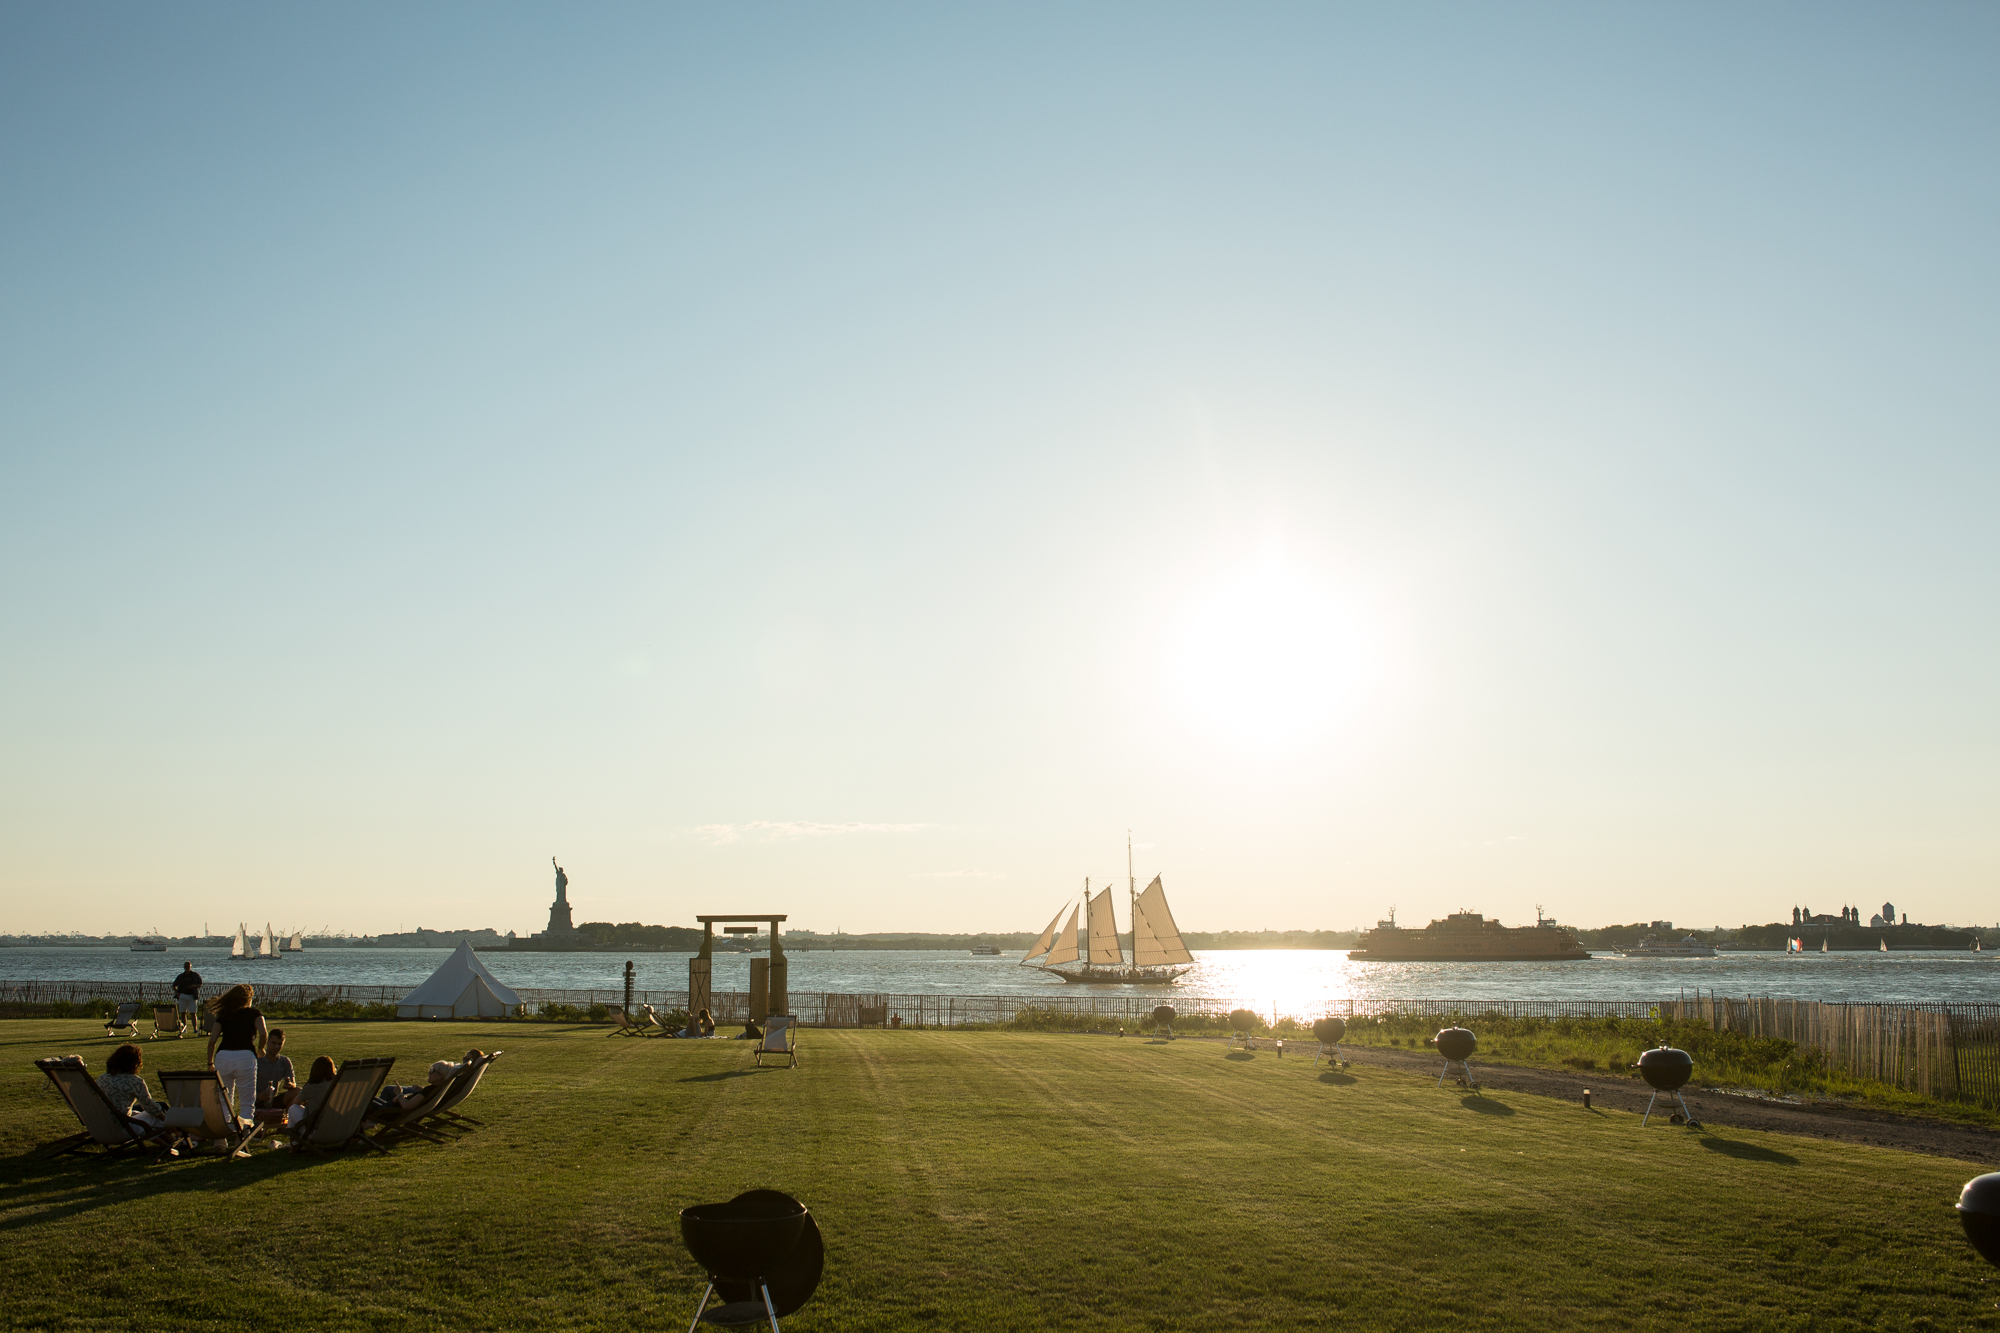 A lawn is in the foreground. In the distance is a body of water and the monument called the Statue of Liberty.